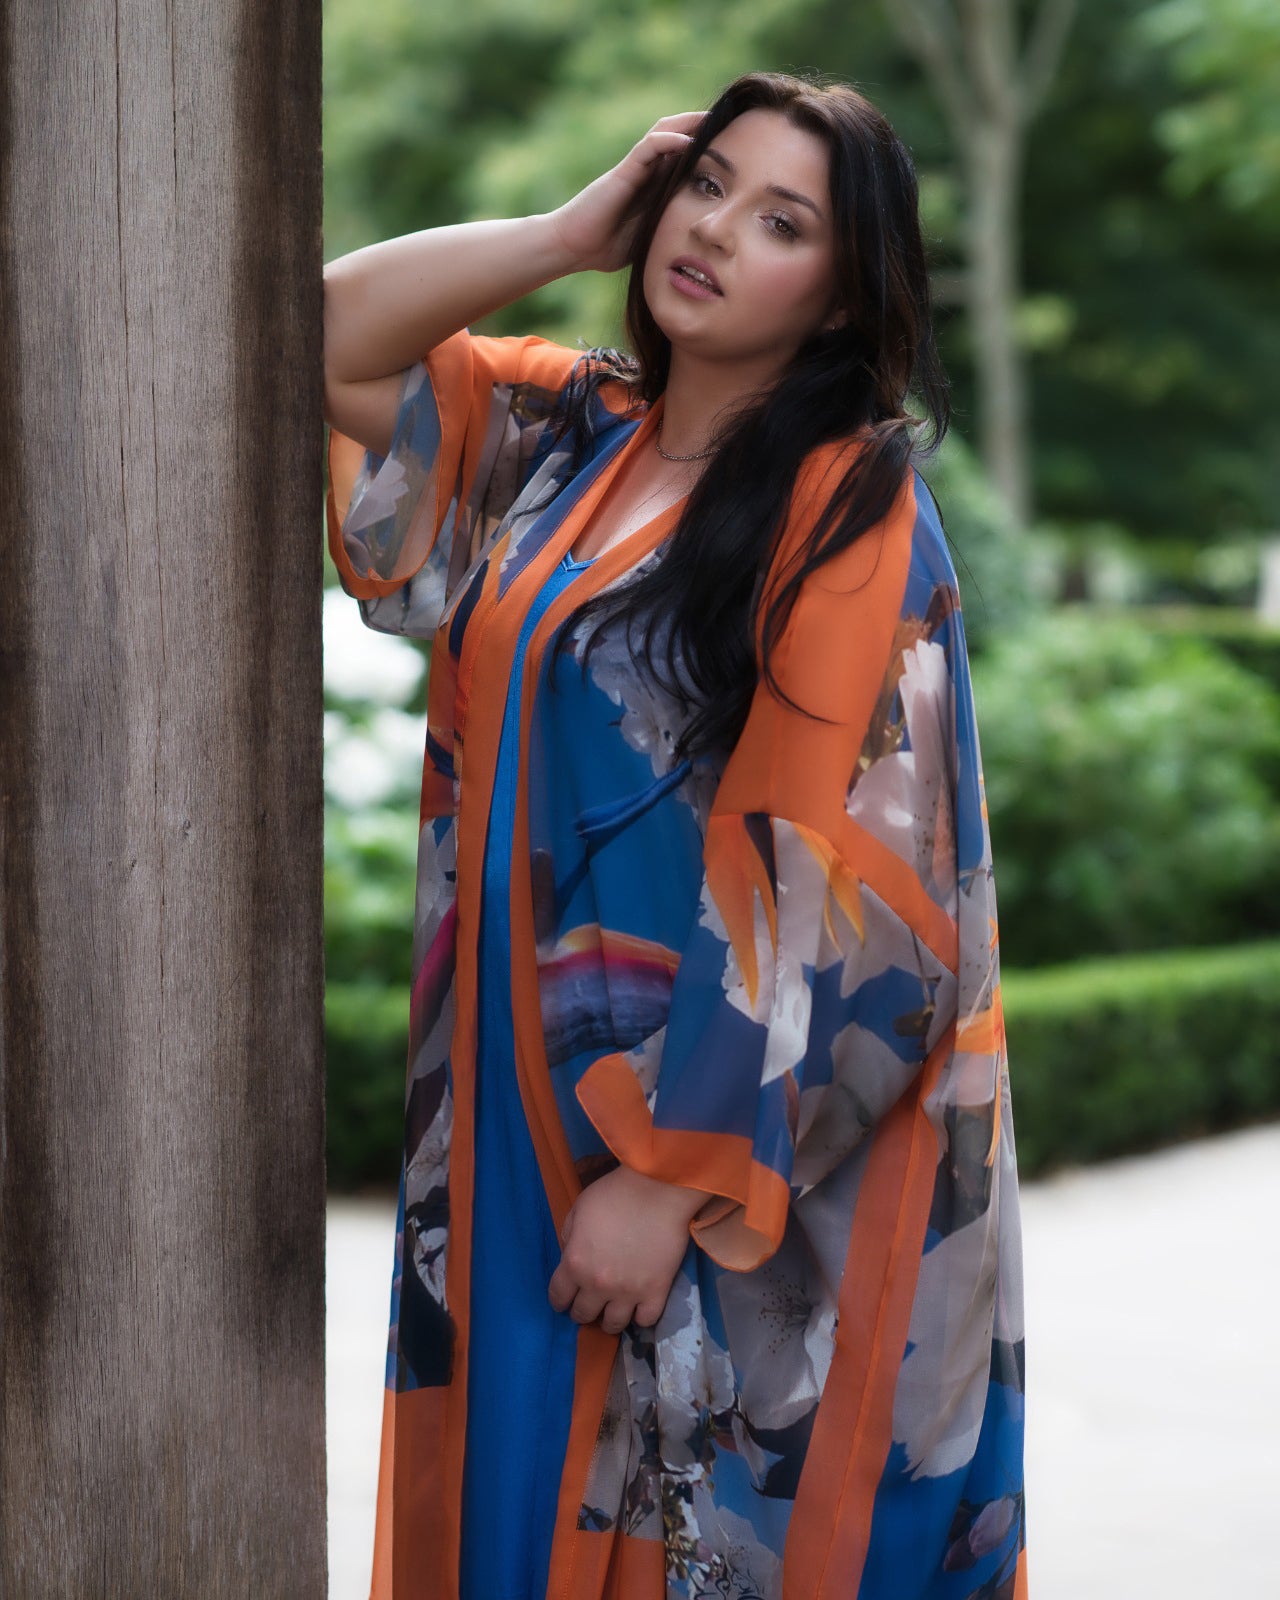 Women's White and Blue Plus Size Georgette Cherry Blossom Kimono shown from the side, styled with a blue dress.